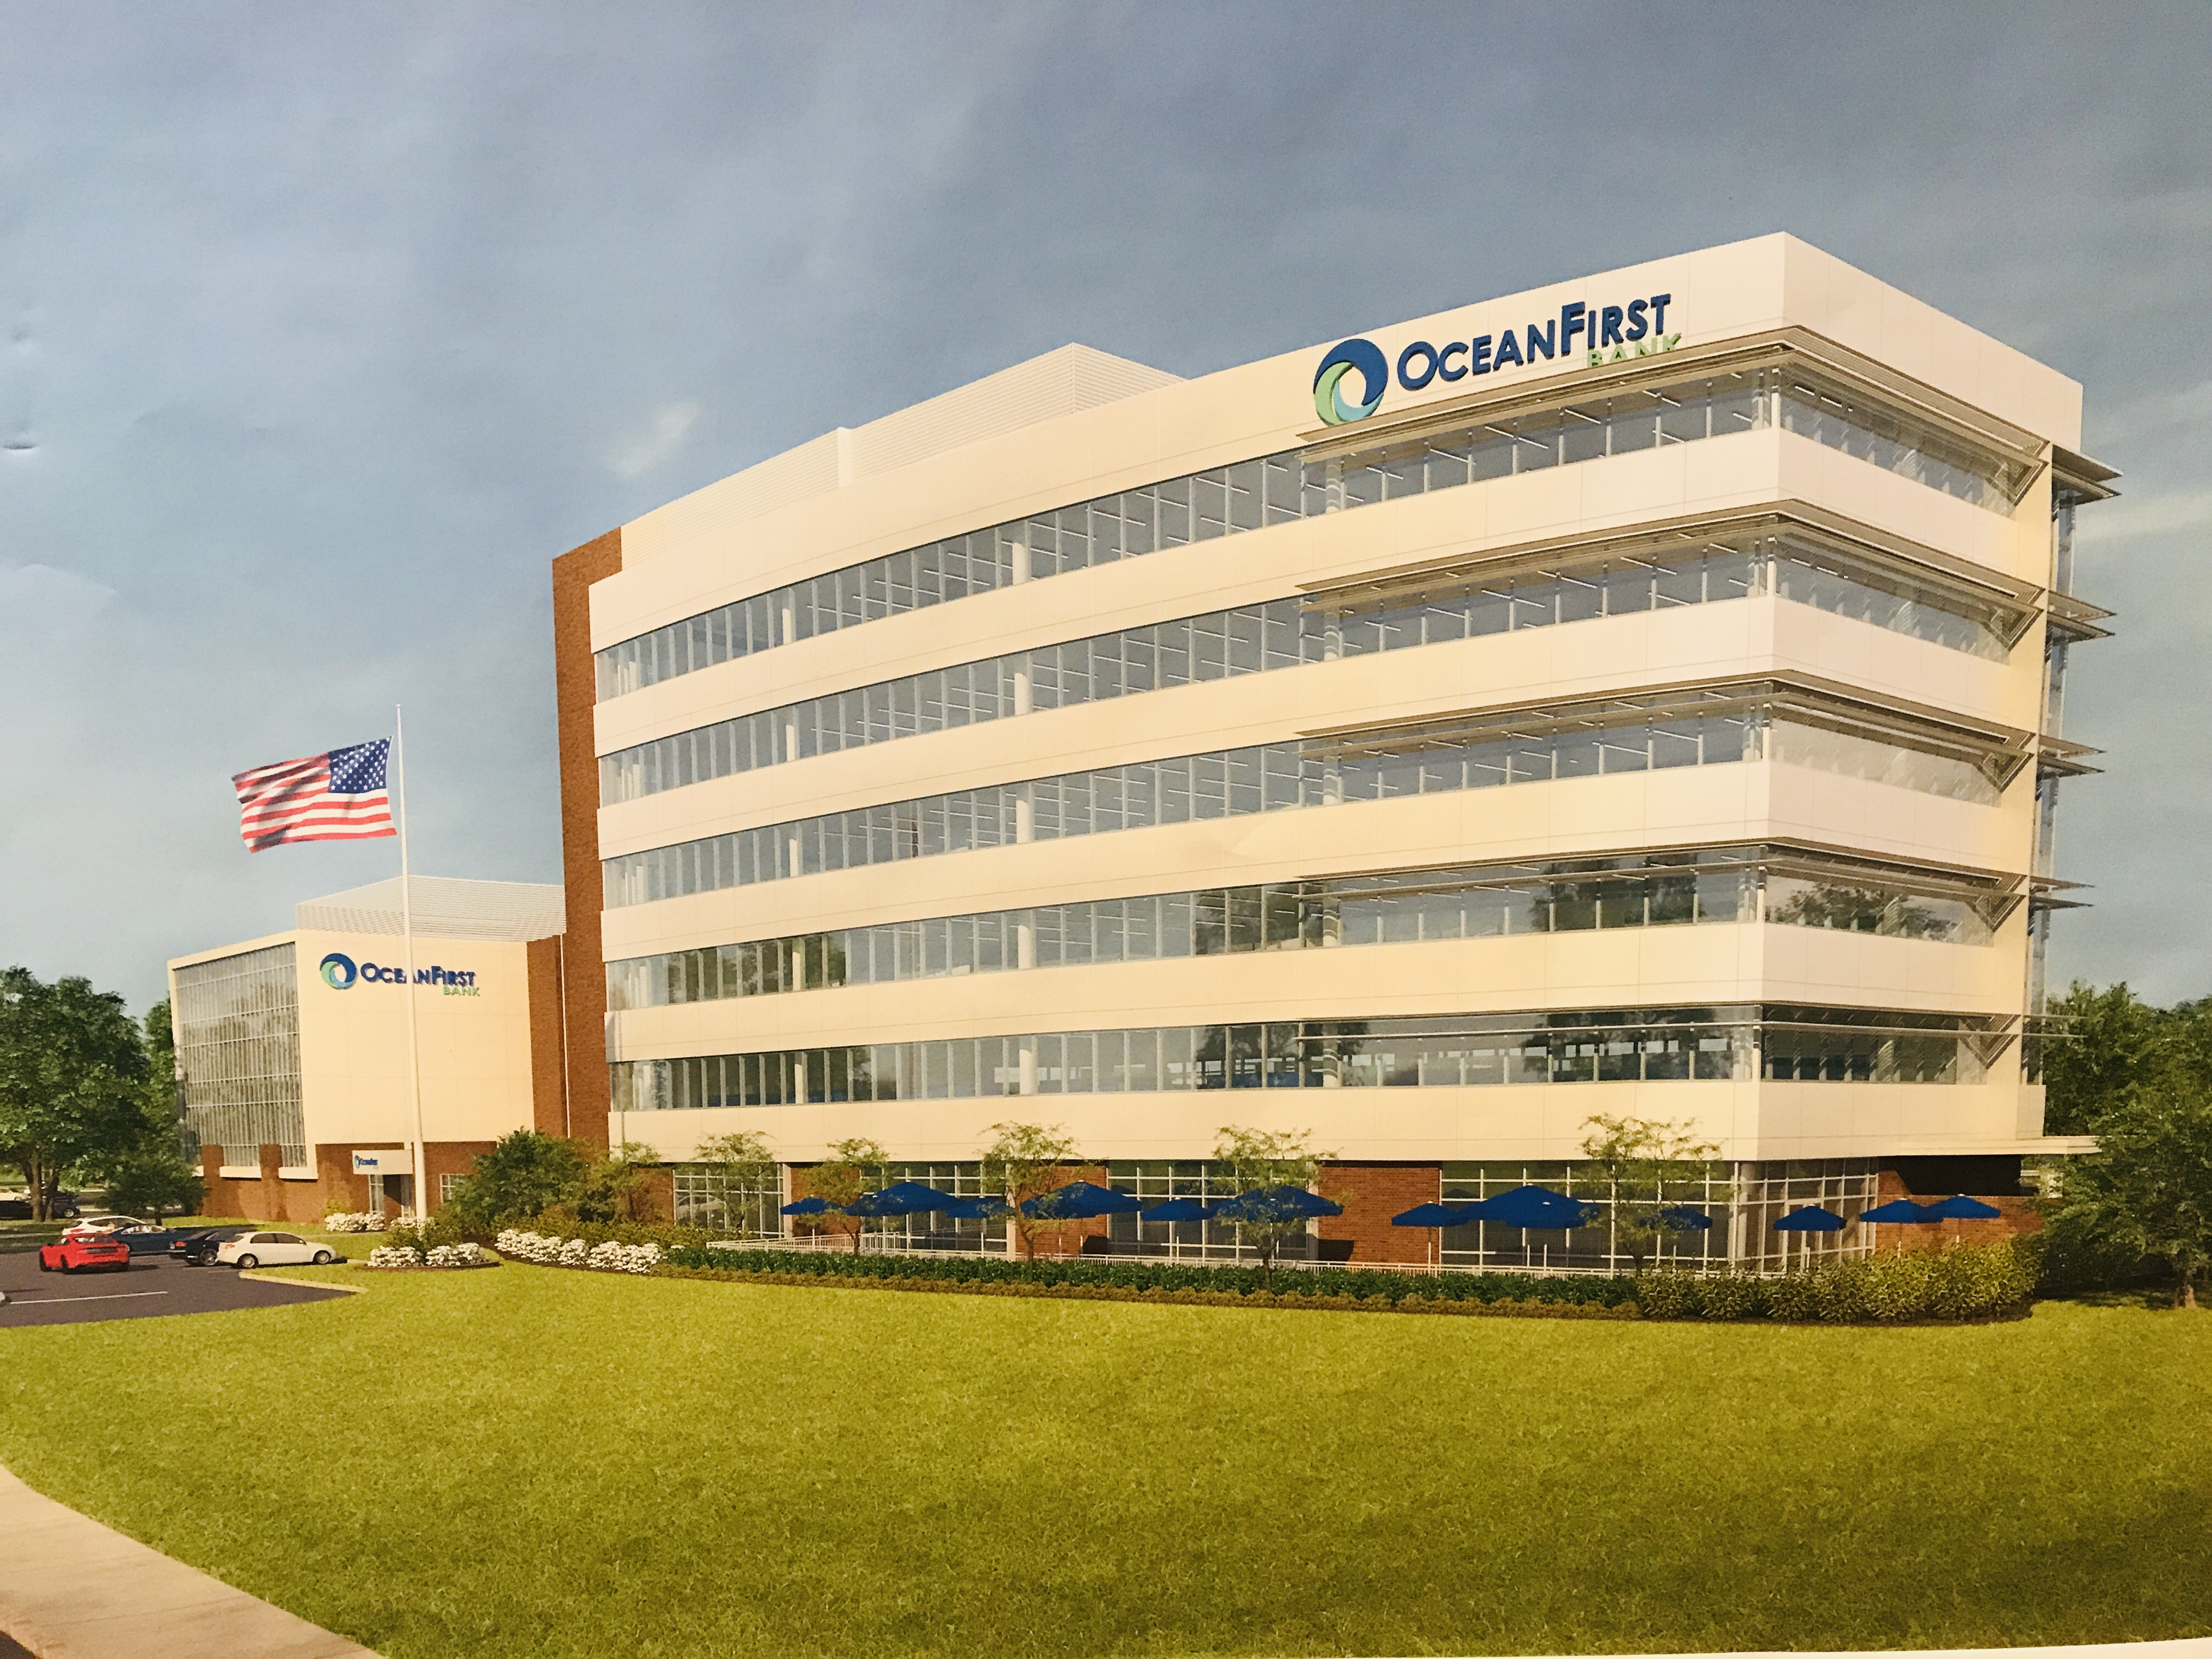 A rendering of the new headquarters of OceanFirst Bank, approved by the Toms River planning board. (Photo: Daniel Nee)